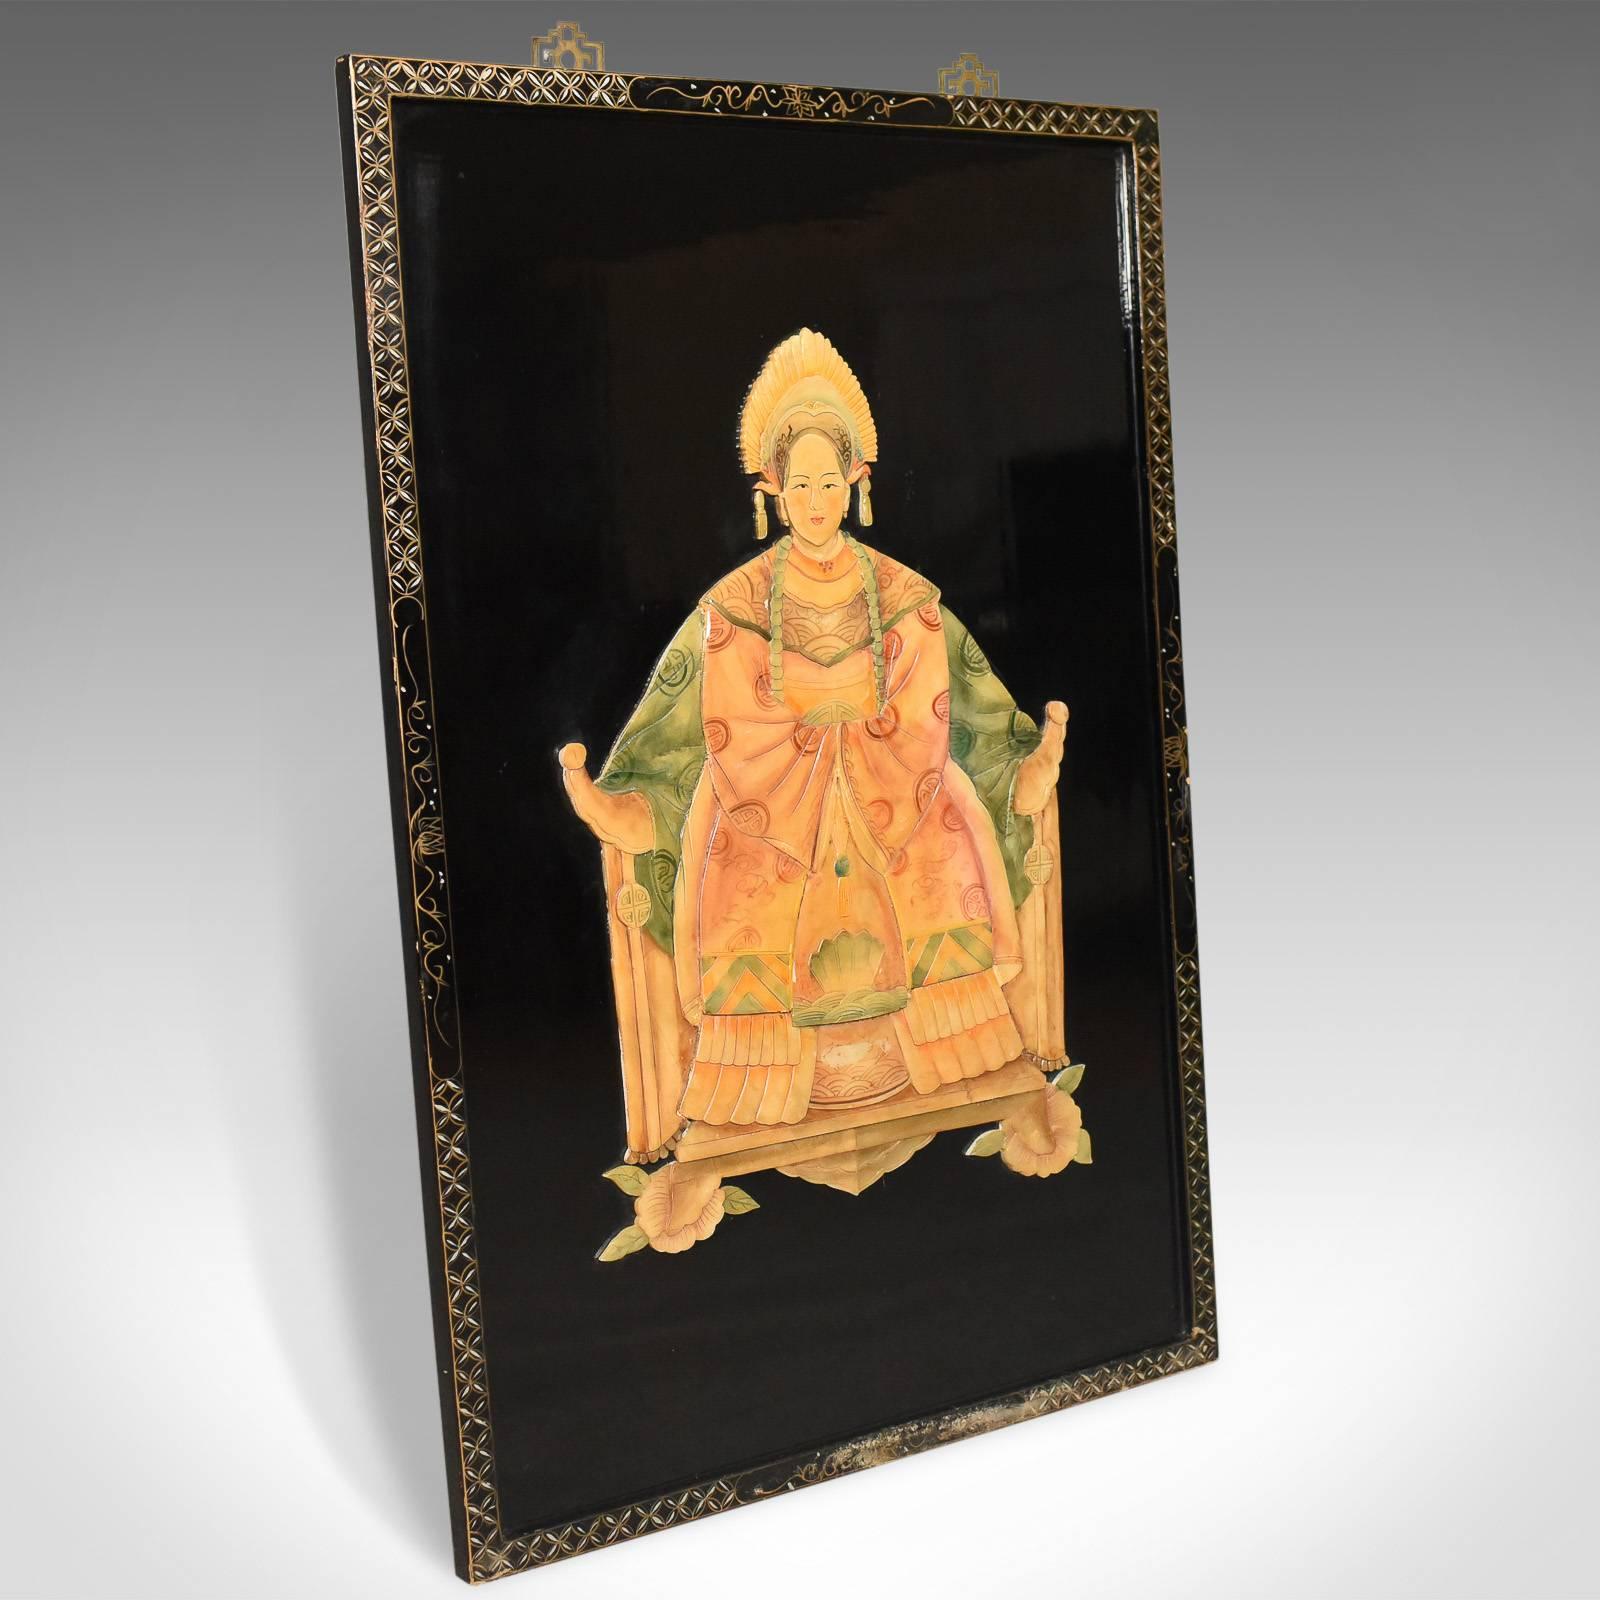 This is a Chinese painted soapstone overlay on lacquer, circa 1930s-1940s.

Top quality low relief stone work
Soft and subtle colors in earthy tones
In contrast to the black of the Japanned backdrop

Image of a figure, or deity, sitting
The